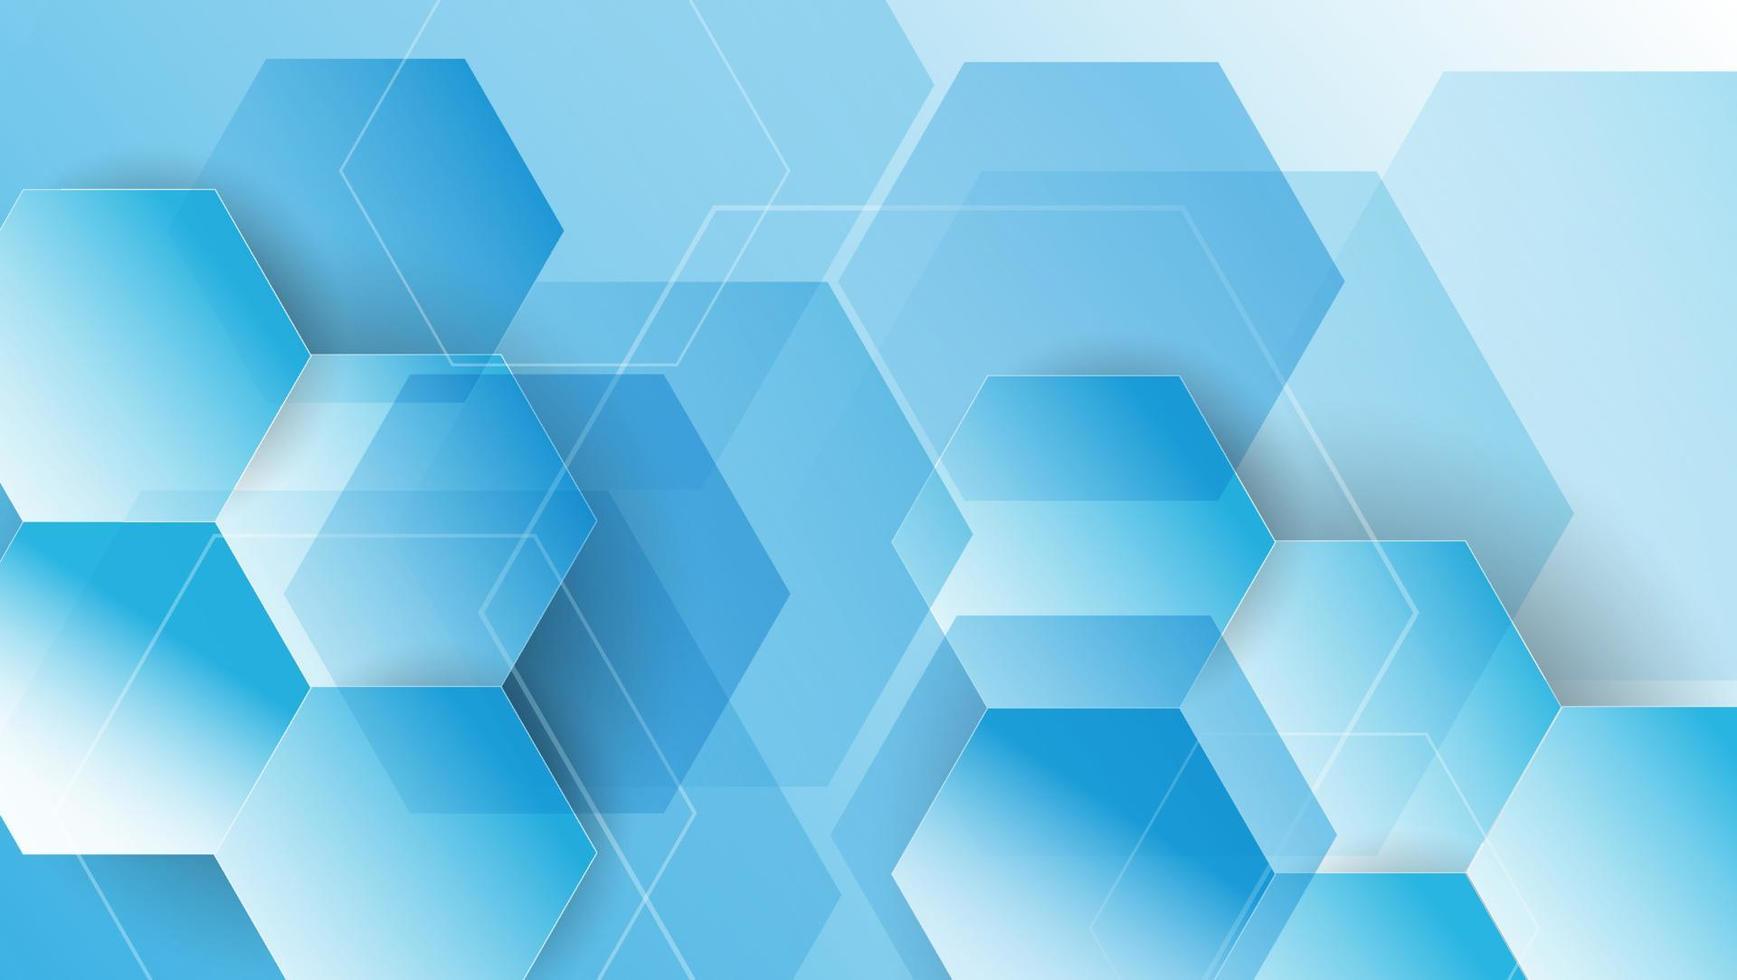 Abstract hexagonal shapes technology digital hi tech concept background in blue and white color vector